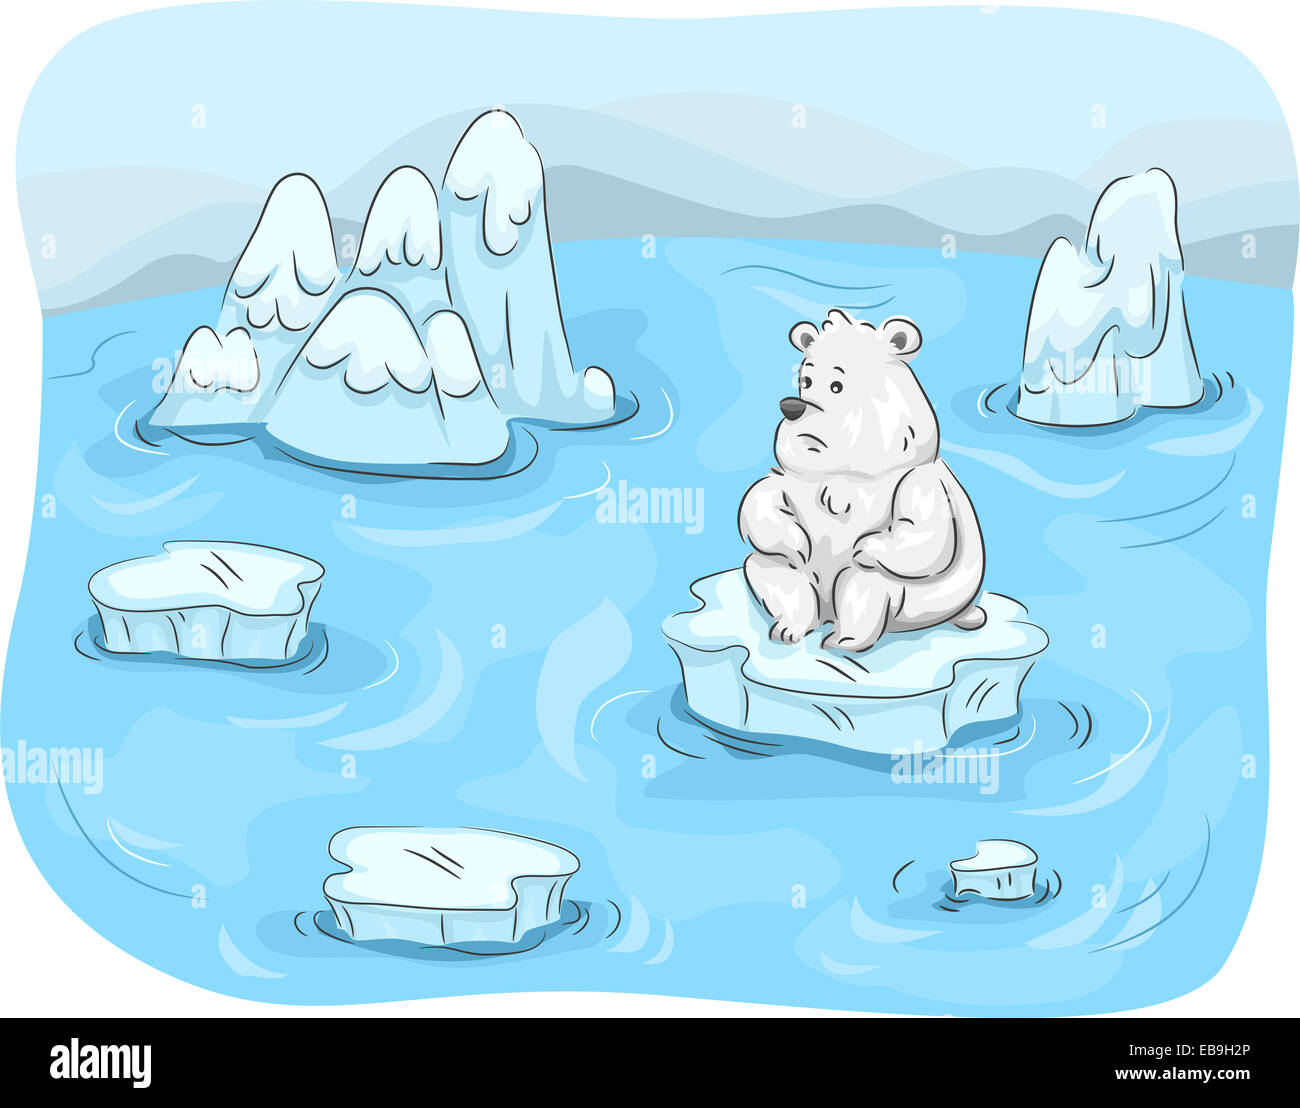 Melting ice Cut Out Stock Images & Pictures - Alamy